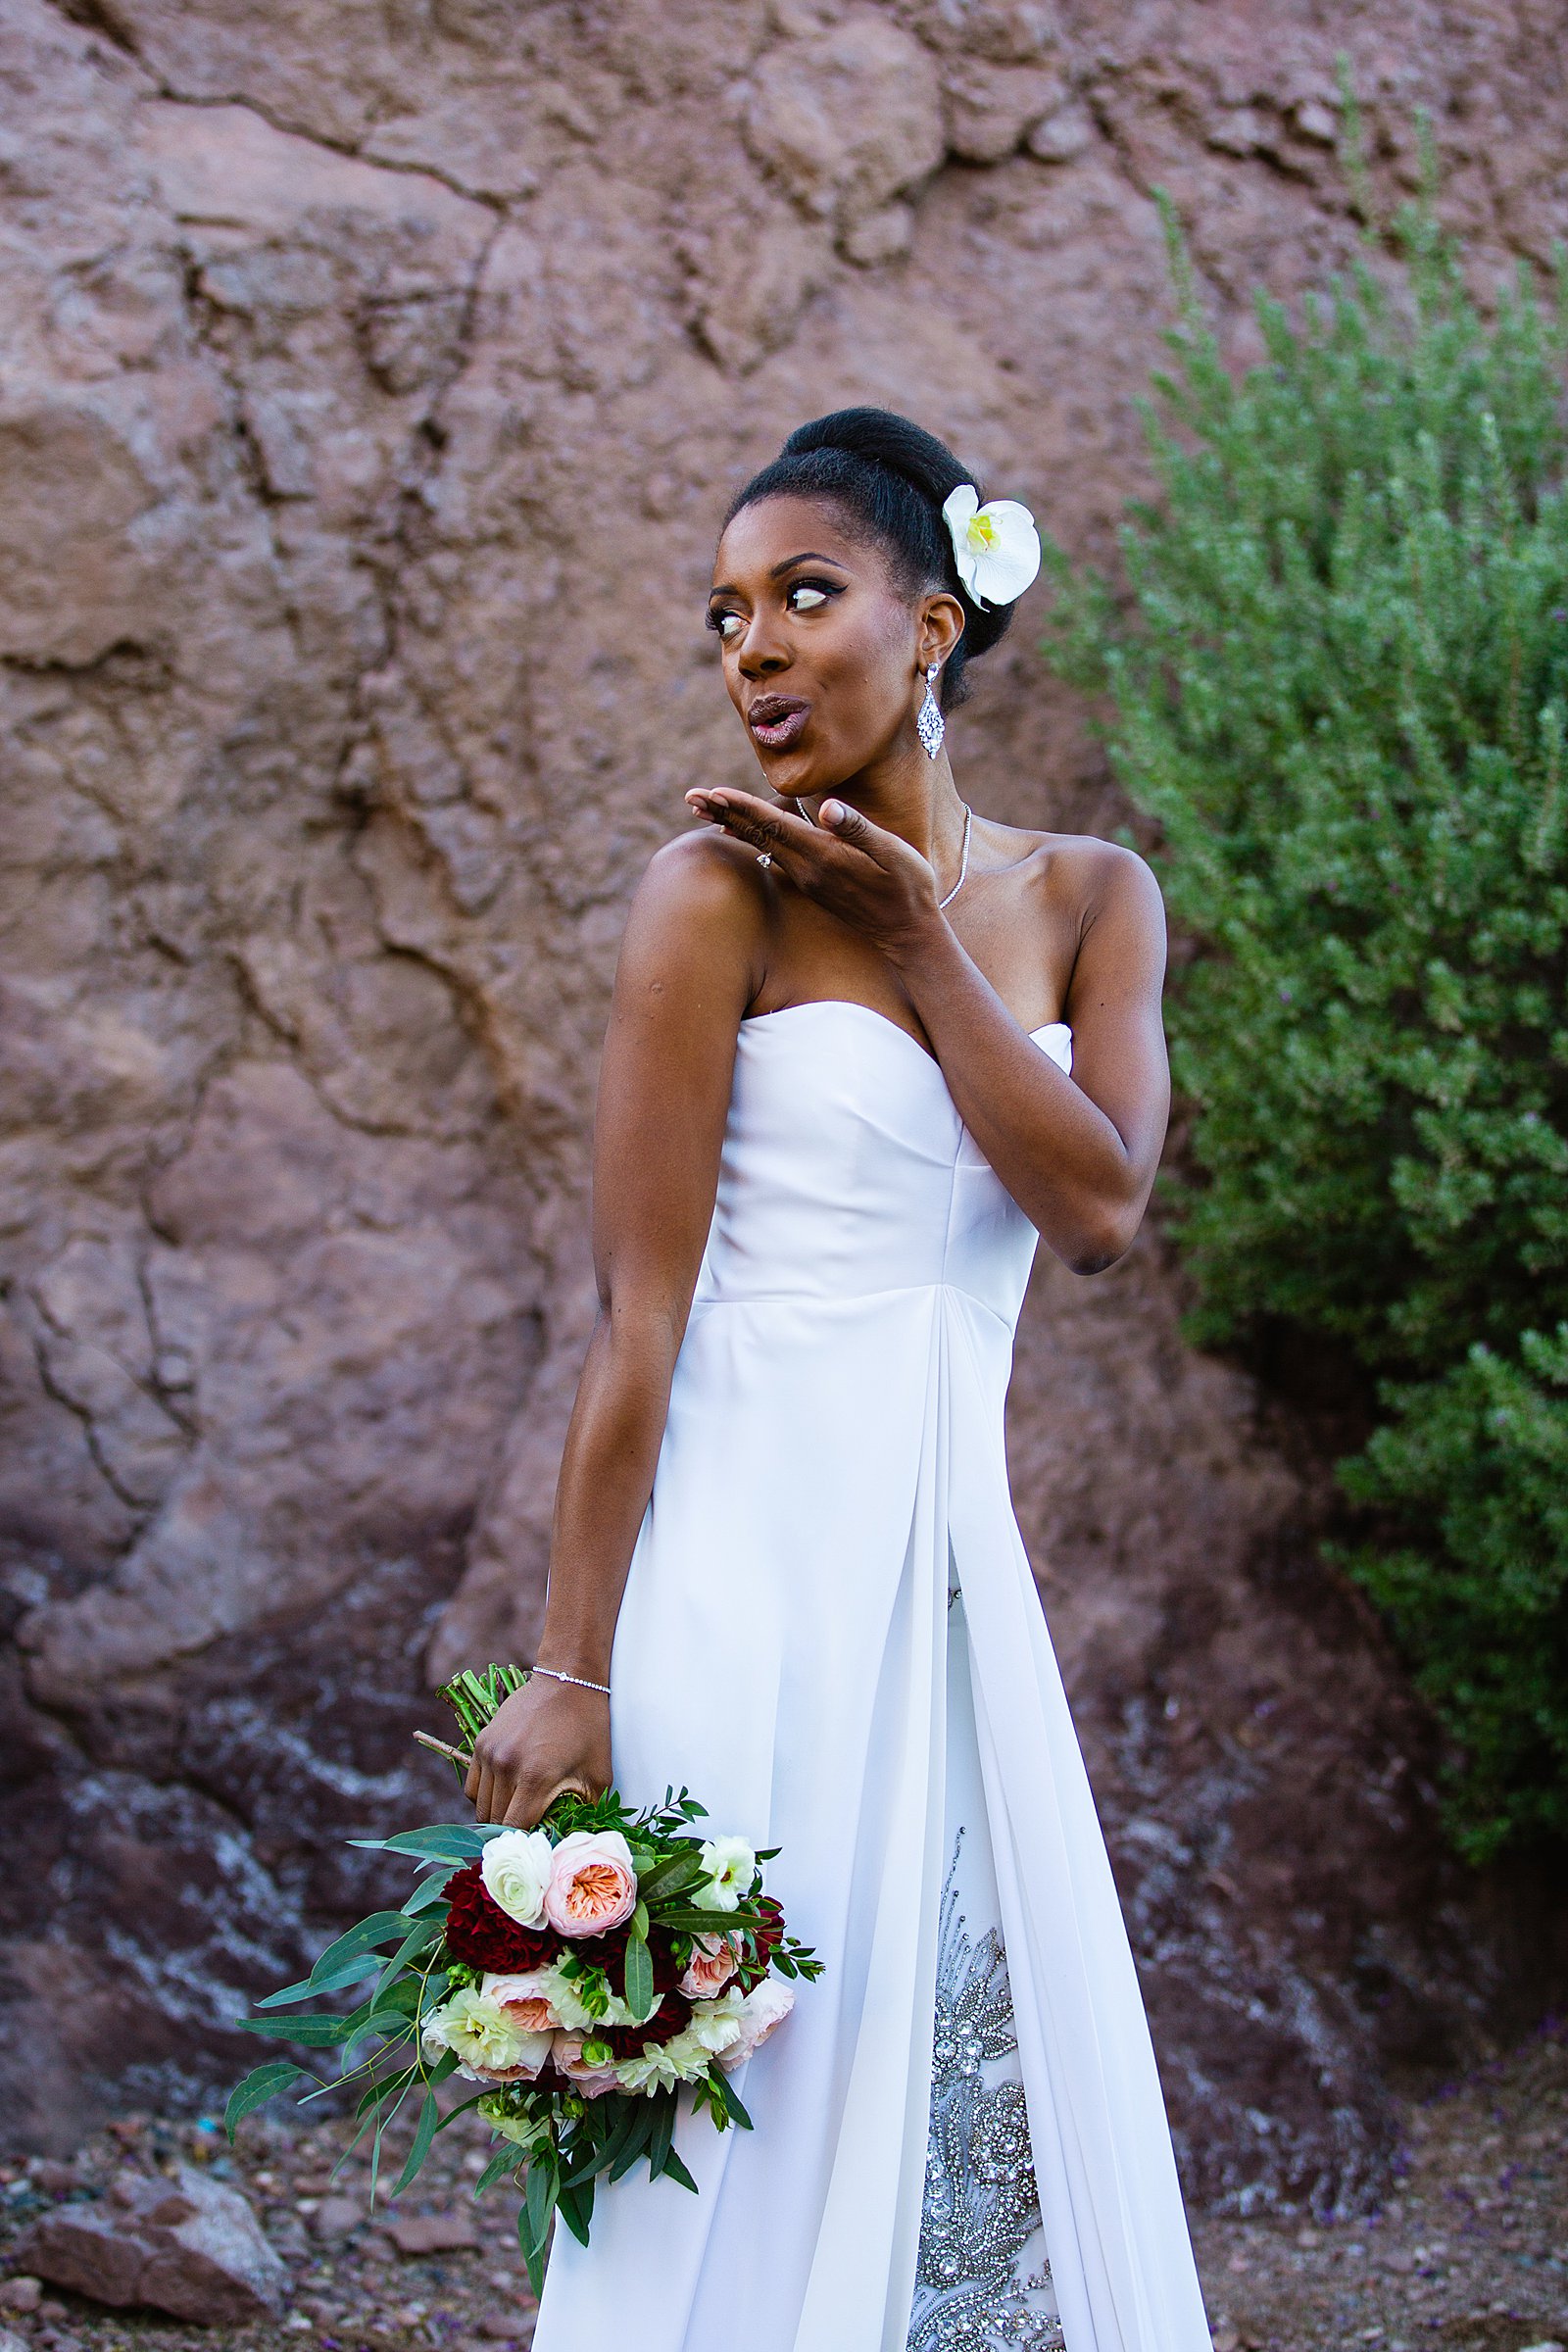 Bride blowing a kiss in her wedding dress for her multicultural wedding by PMA Photography.